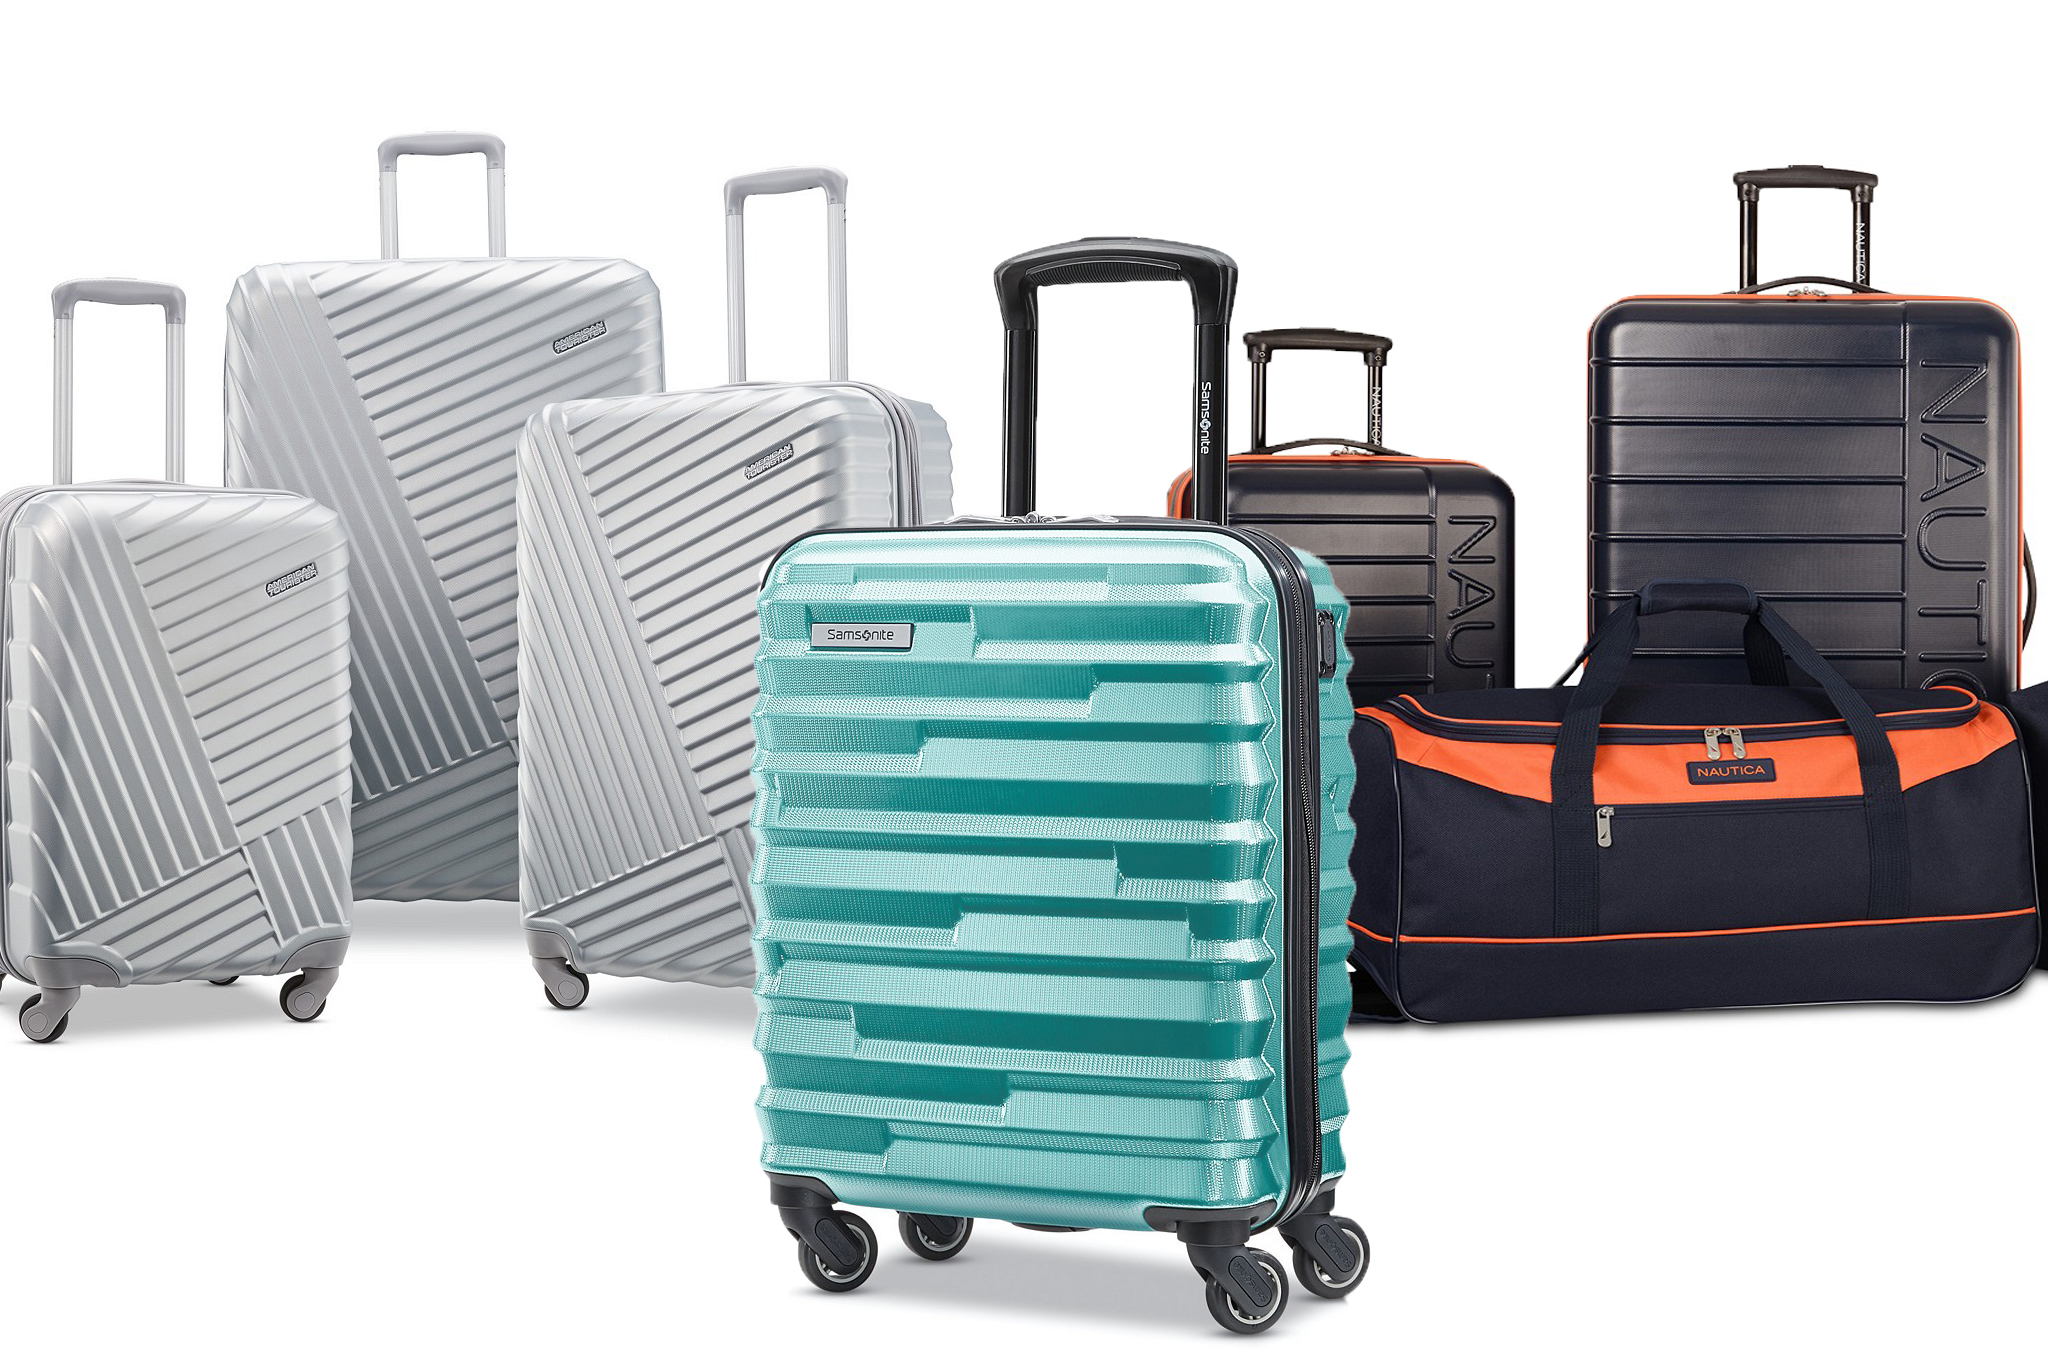 This Samsonite carry-on fits under an airplane seat and is just $72